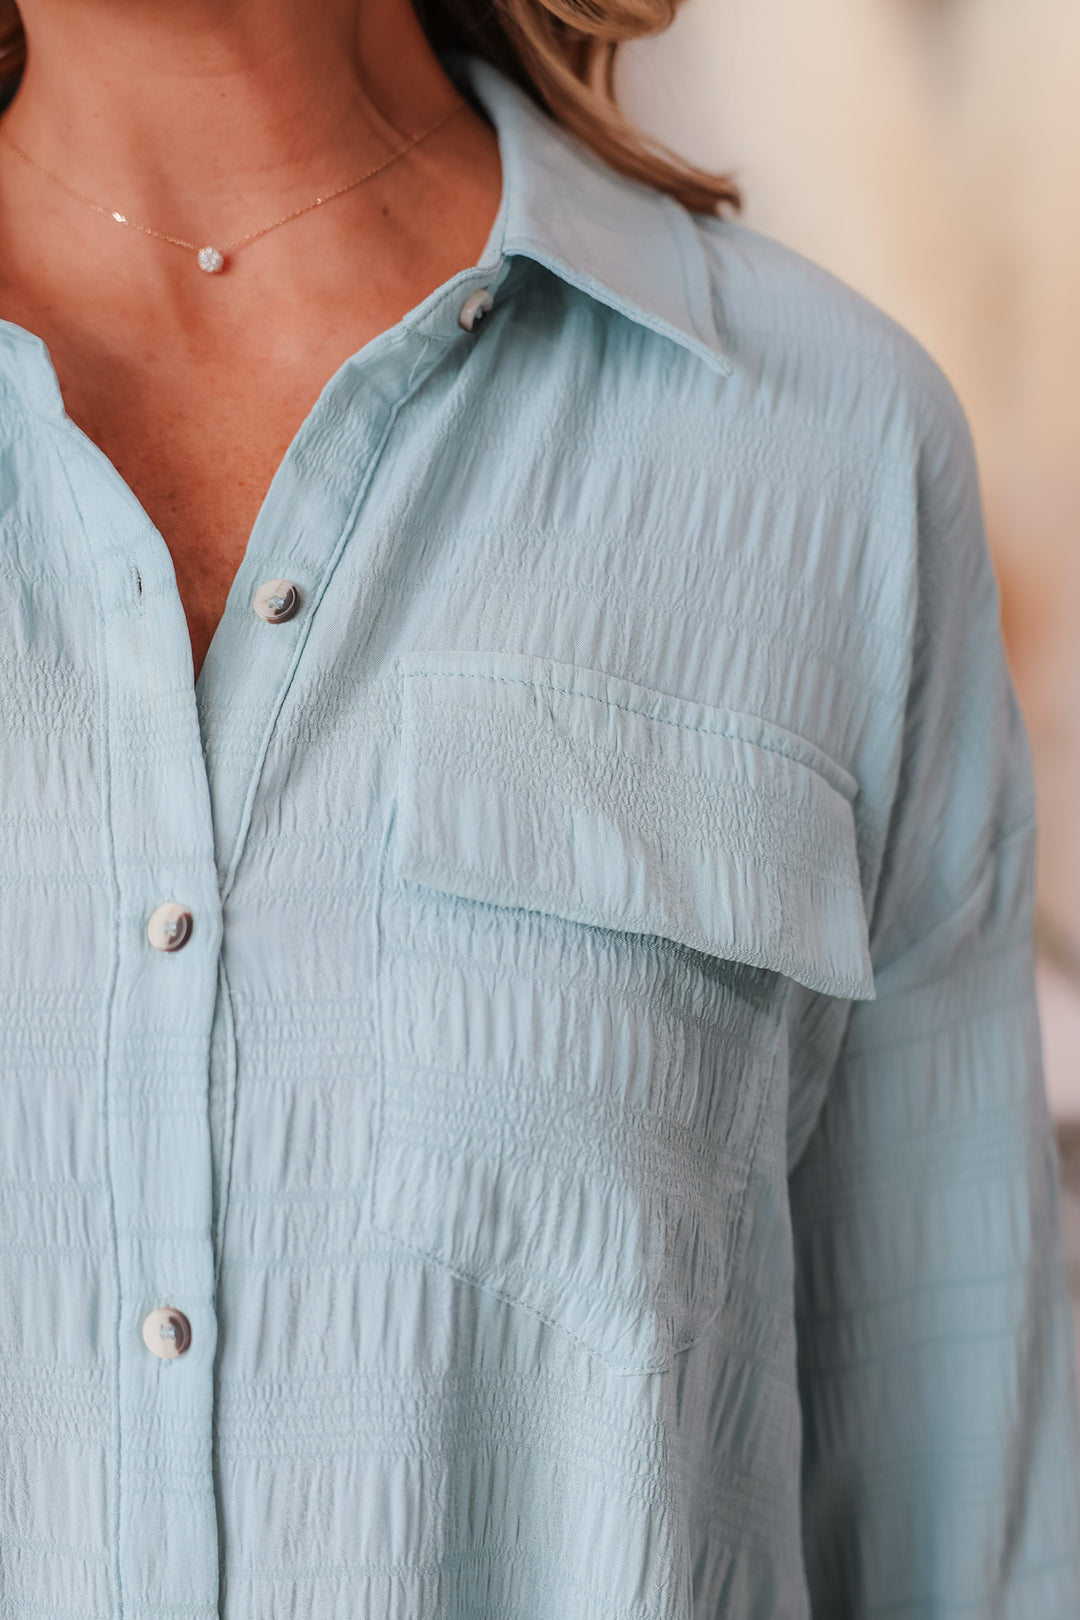 A closeup of the shoulder of a woman wearing a light blue button down dress with a pocket.